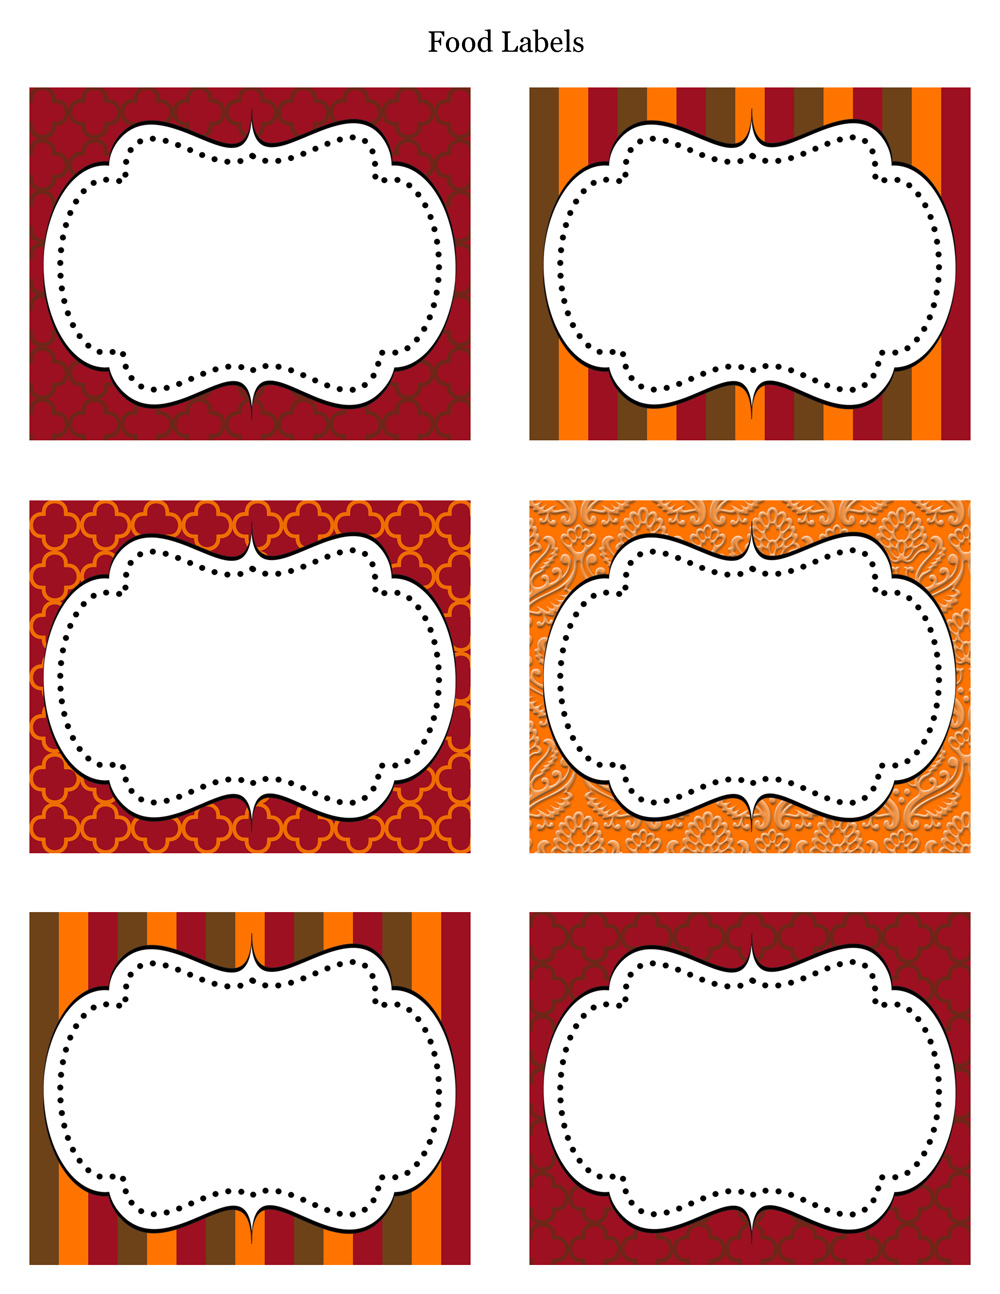 9 Best Images of Food Labels Printable Template - Thanksgiving ...